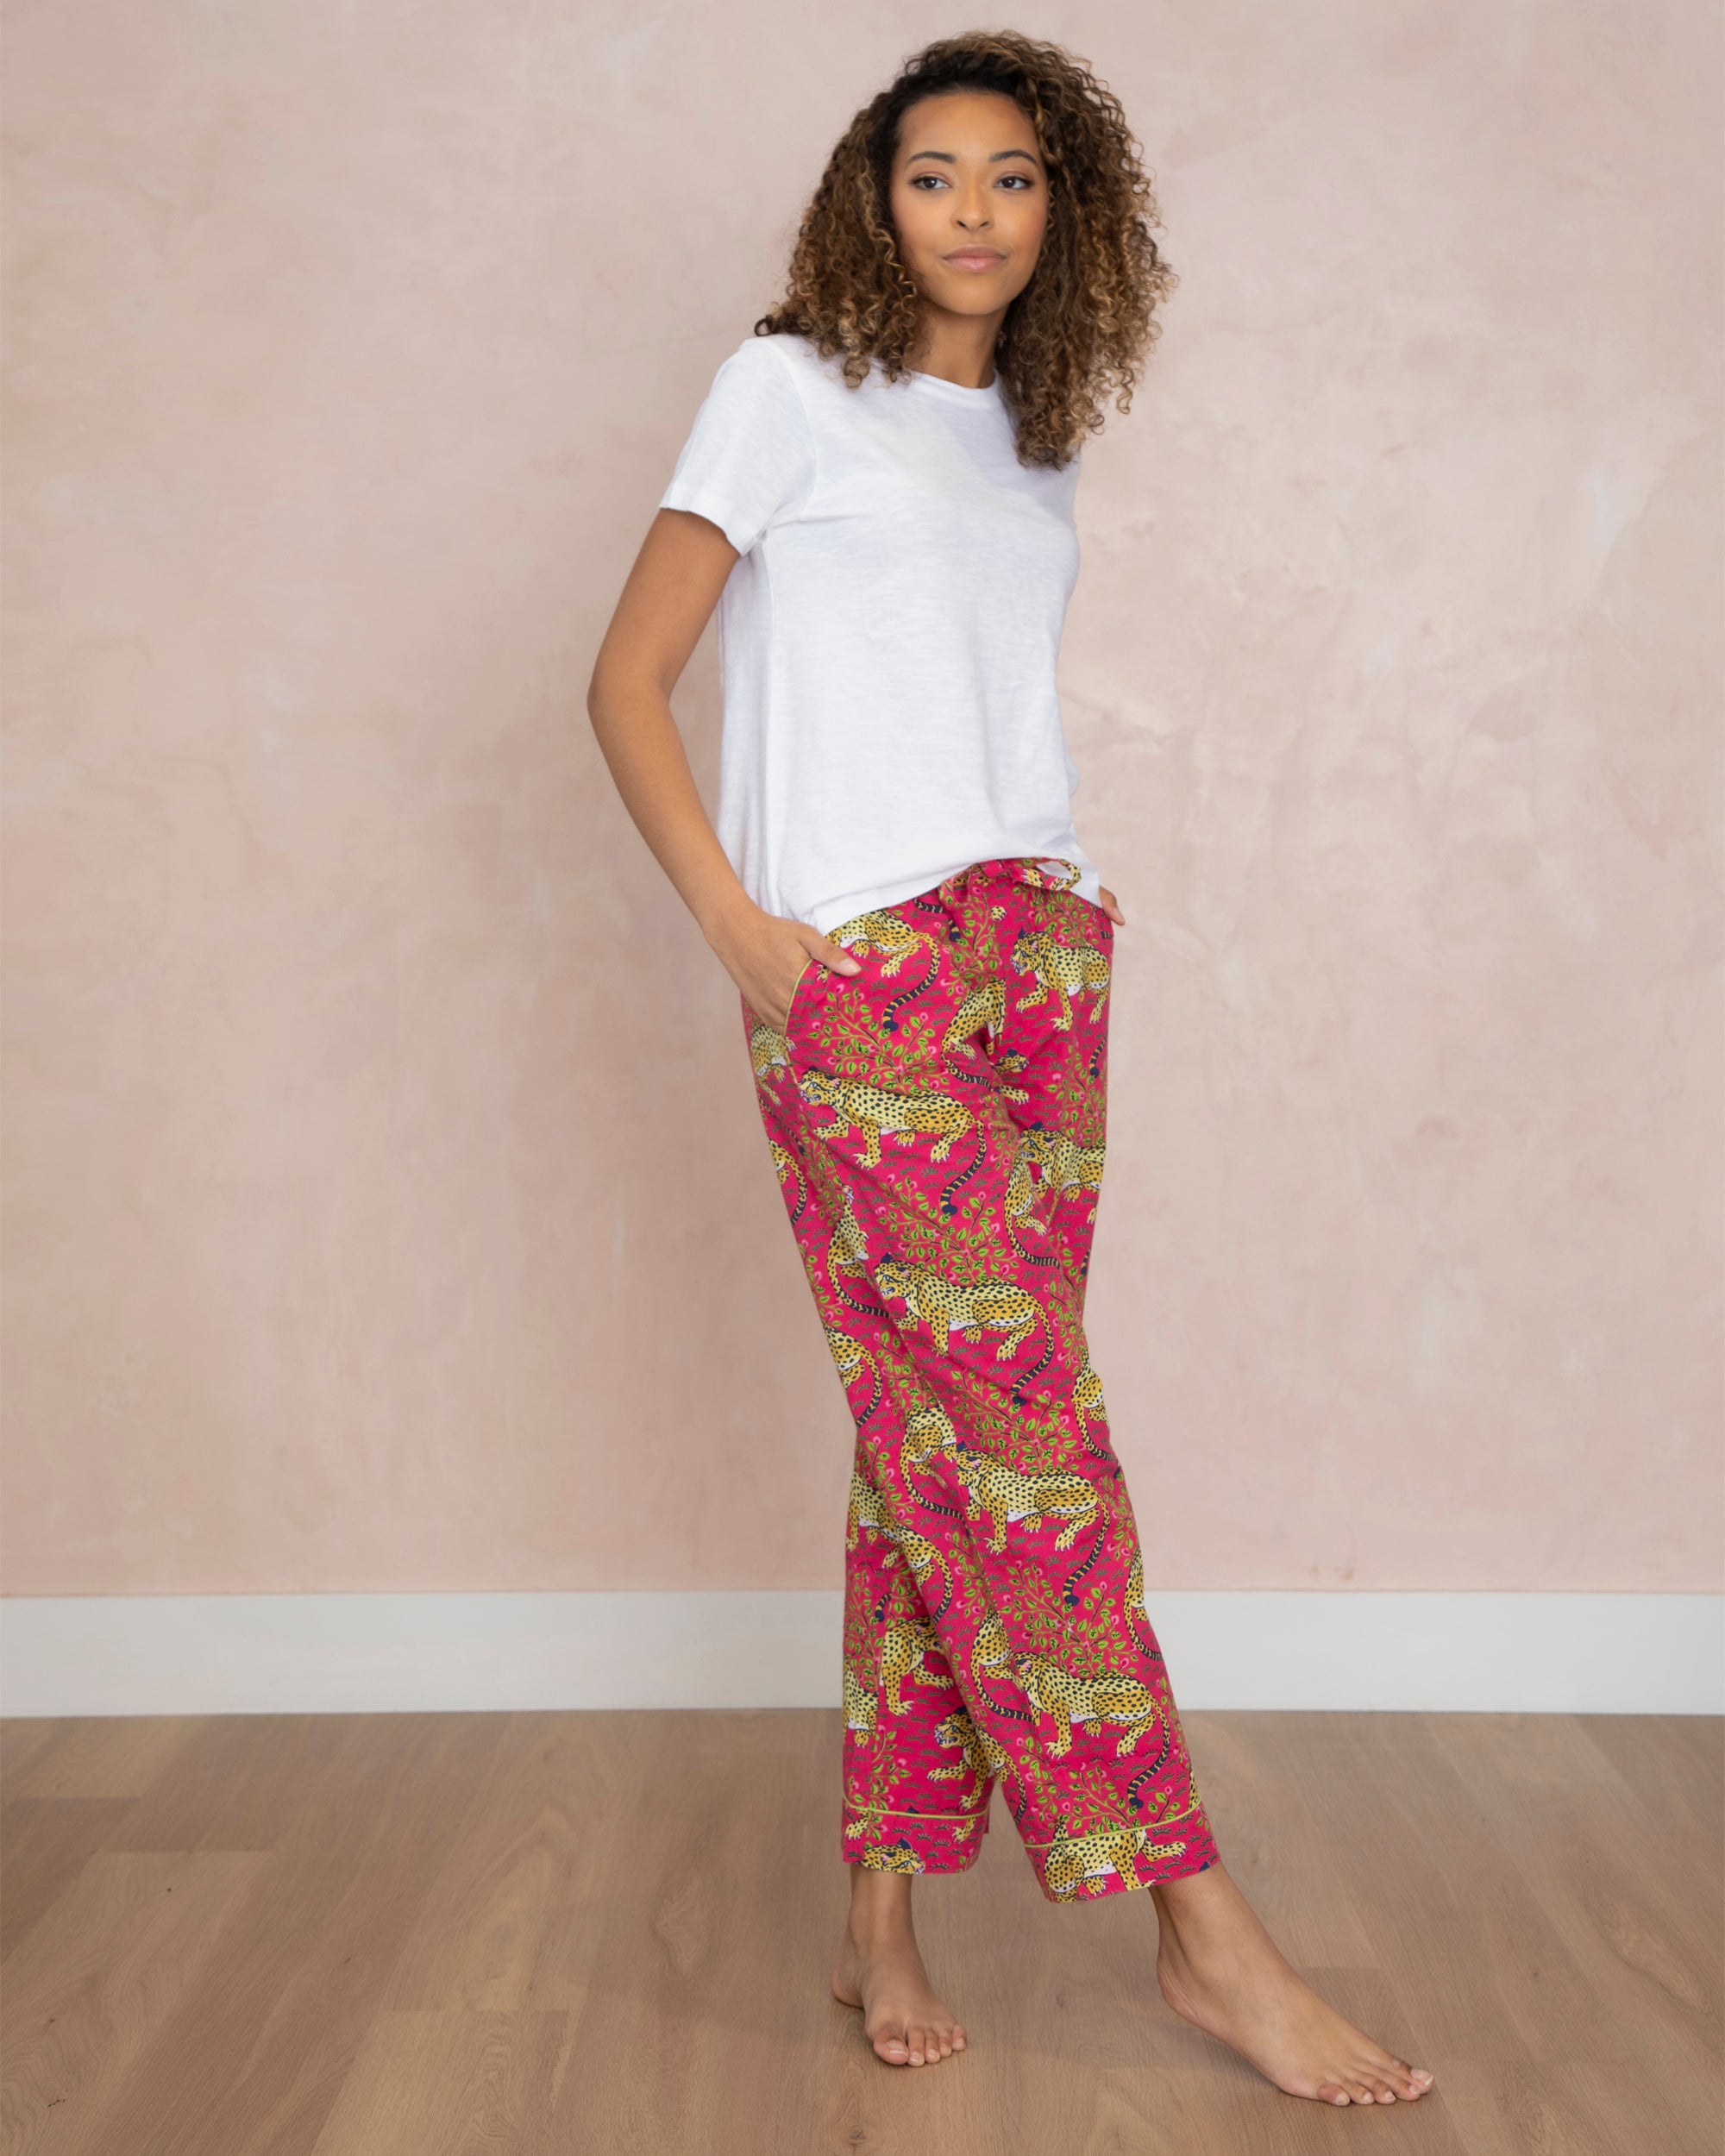 Free Photos - A Female Fashion Model Posing For A Photo Shoot, Wearing Pink  Pants And A White Shirt. She Is Turning Her Head To The Side, Giving A  Profile View Of